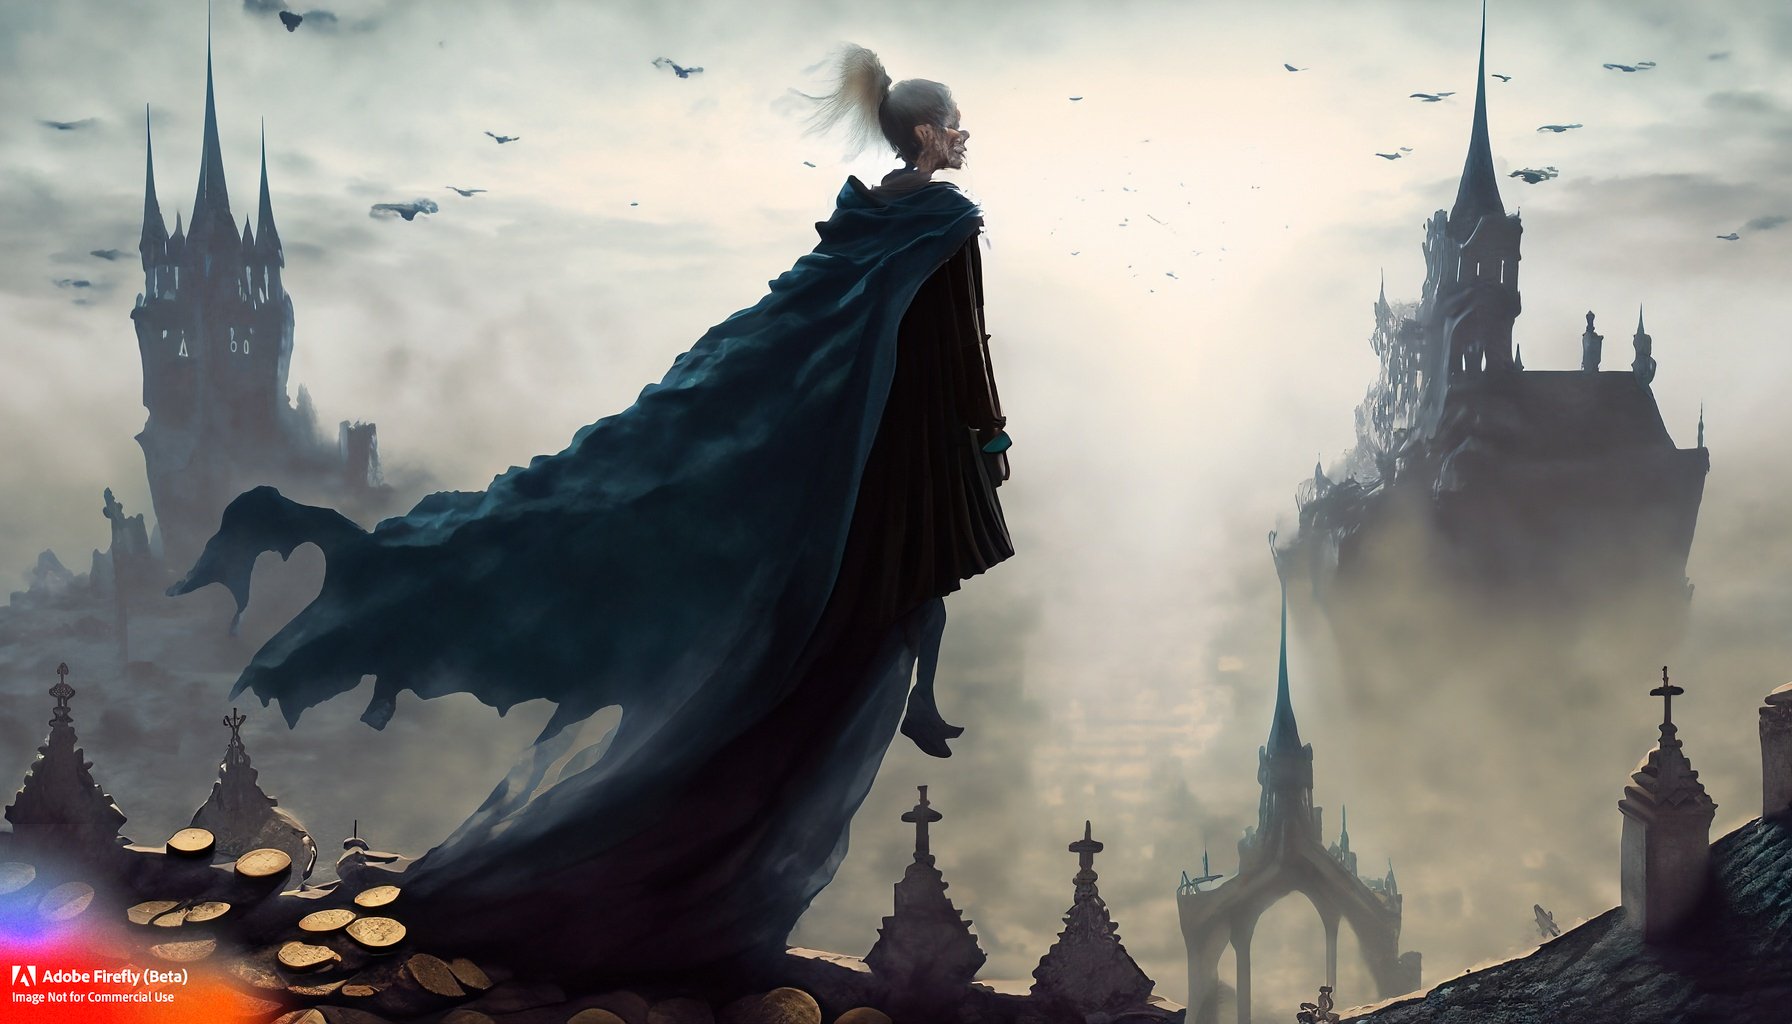 Firefly_mist+and fog, person in a dark cape made of fabric ribbons. The person is flying over an ancient city rooftops, coins, a castle with many spires_art,wide_angle,fantasy_6754.jpg